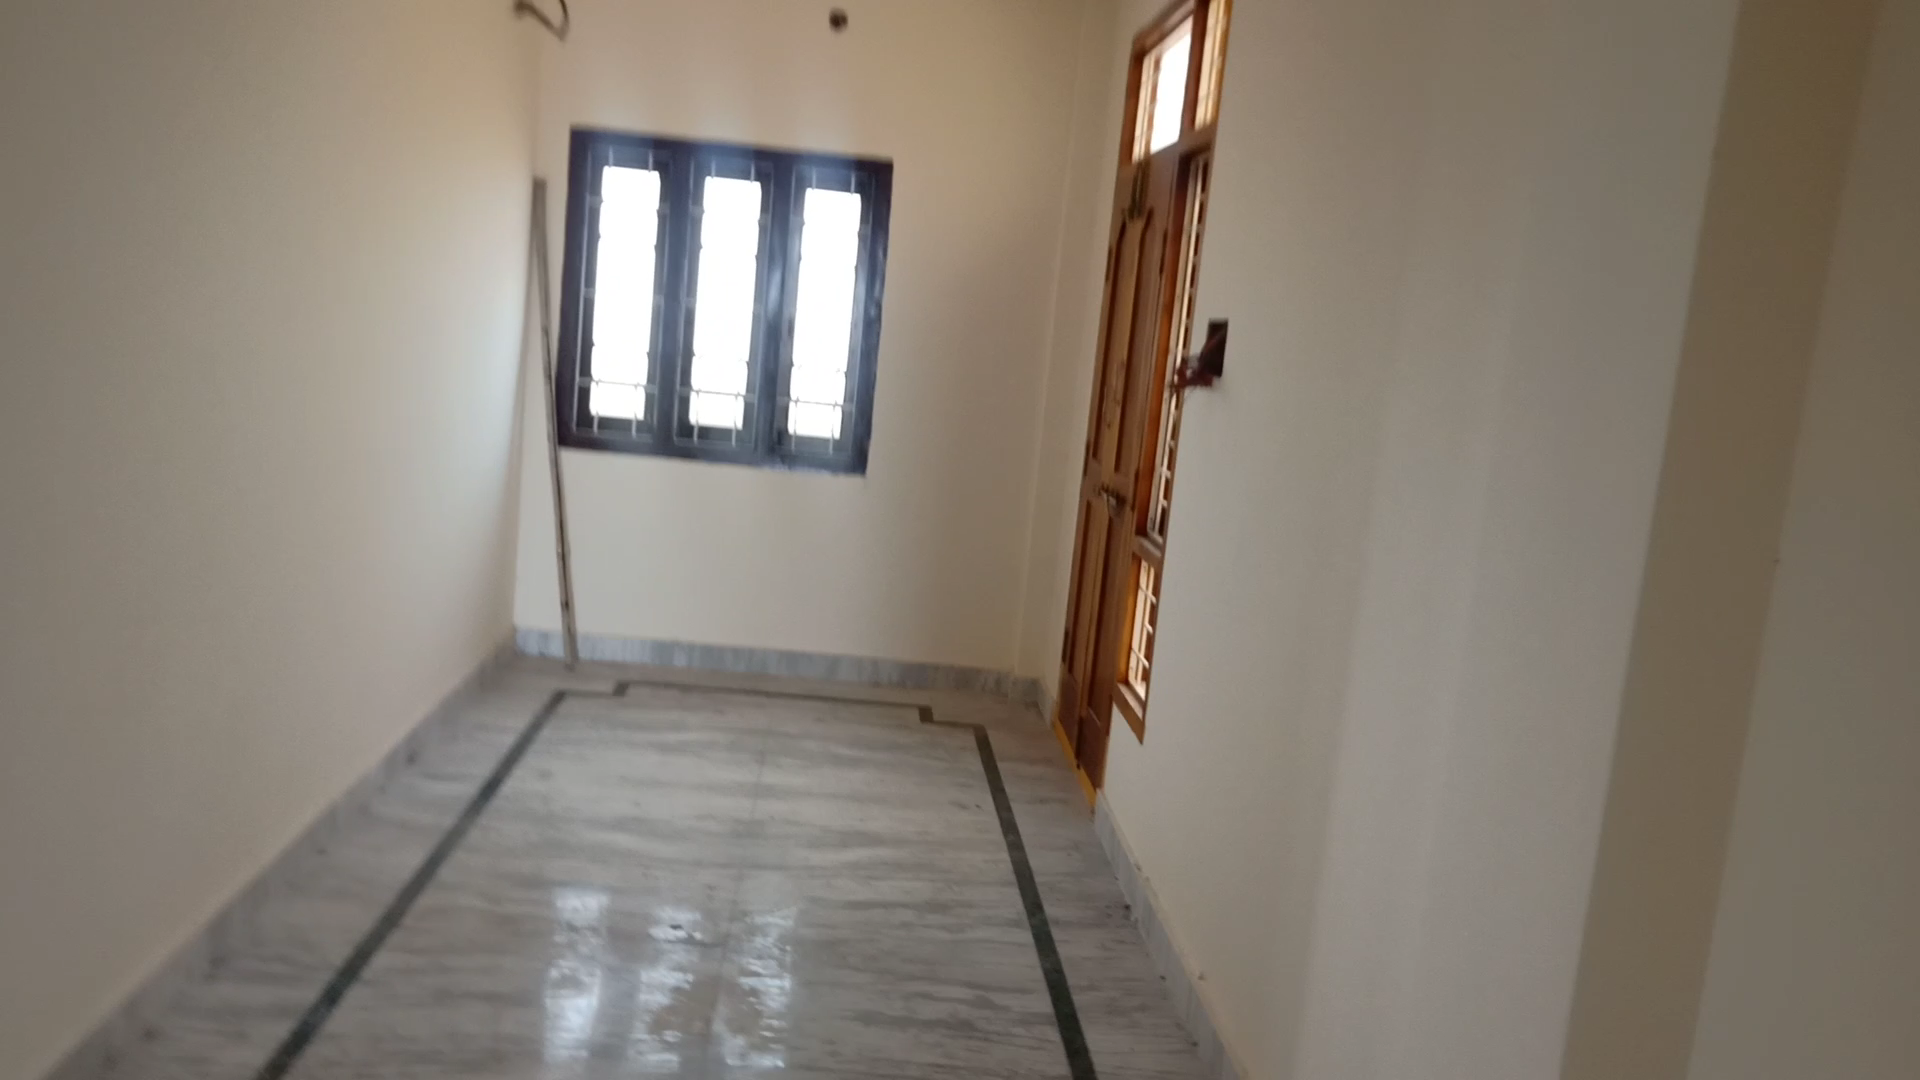 Haripriya Real Estate East Face 2 BHK House For Sale in 